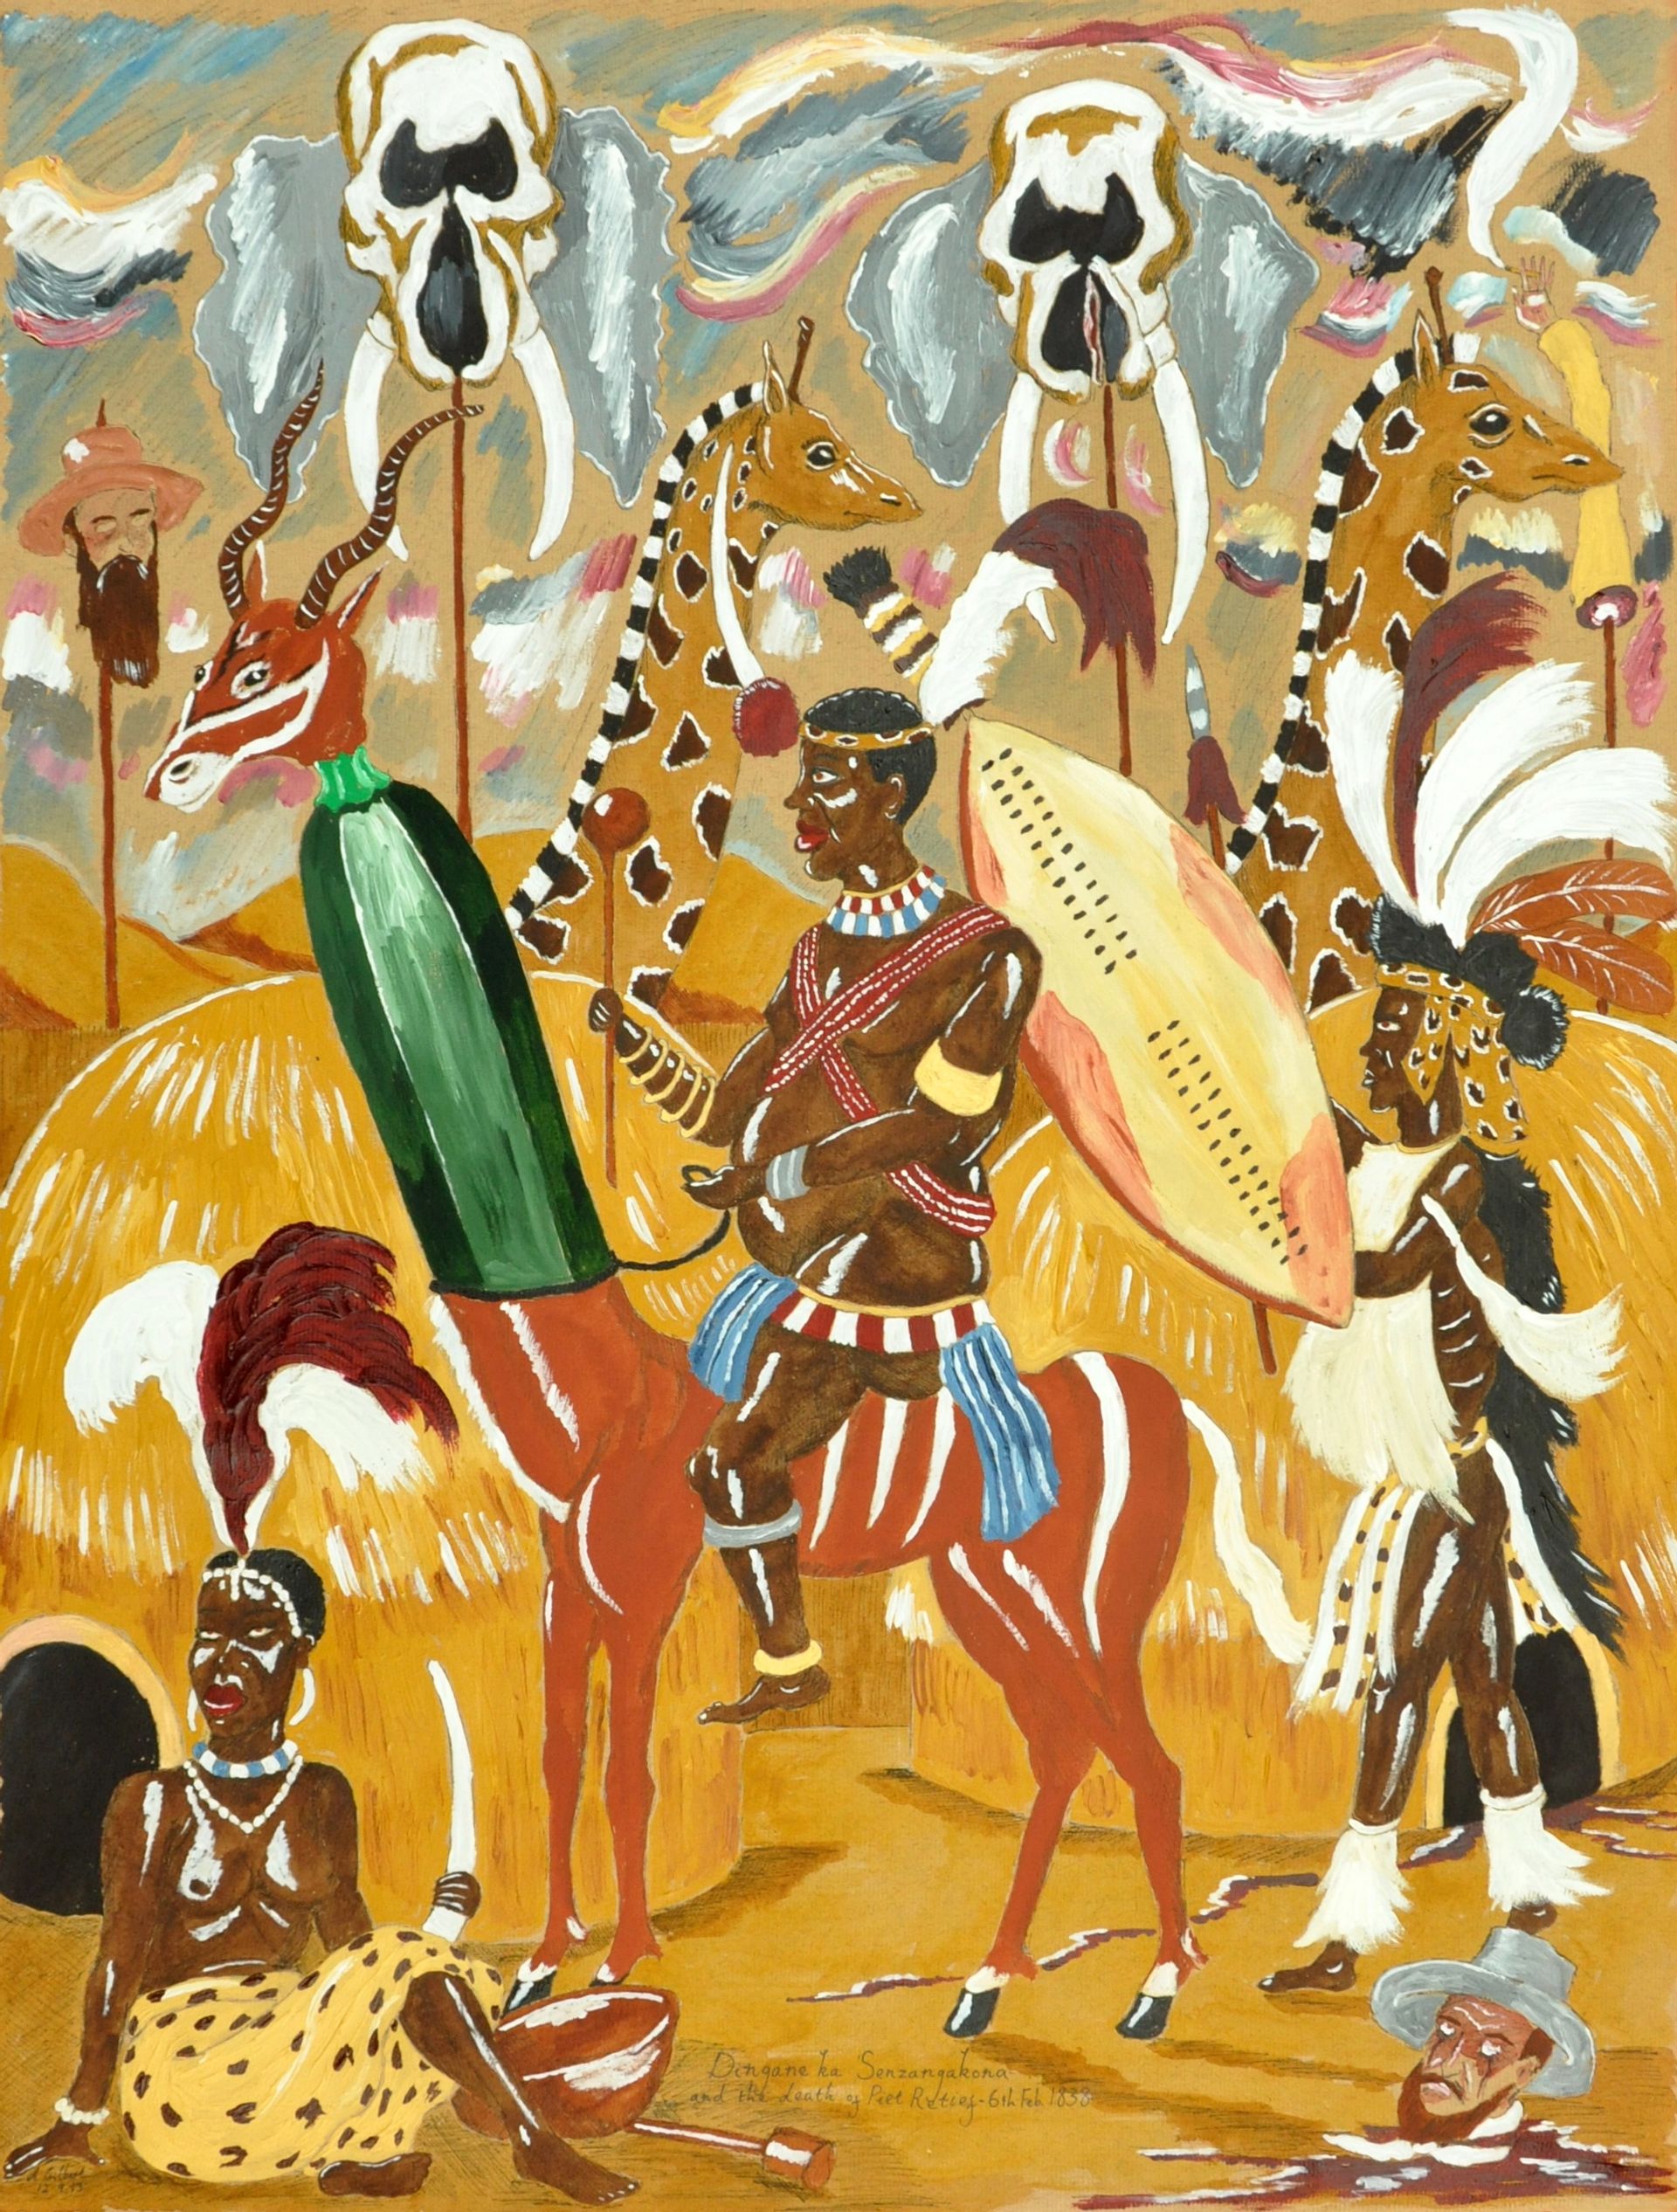 Andrew Gilbert, King Dingane kaSenzagakhona Zulu with head of Piet Retief, 1838, 2013, acrylic, water colour and fineliner on paper, 62 × 48 cm, photo: Sebastian Kissel